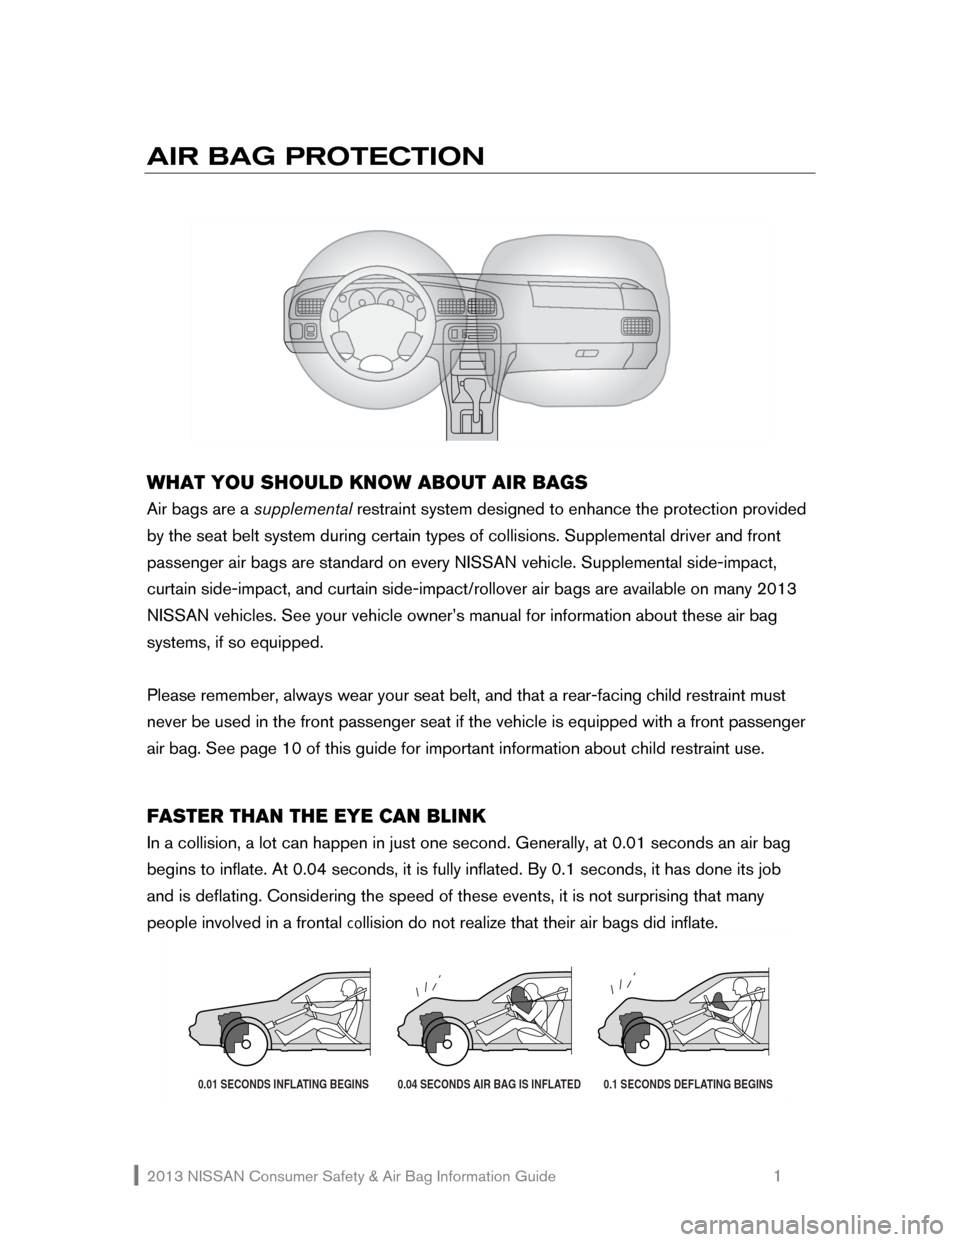 NISSAN FRONTIER 2013 D40 / 2.G Consumer Safety Air Bag Information Guide 2013 NISSAN Consumer Safety & Air Bag Information Guide                                                   1 
AIR BAG PROTECTION 
    
 
 
WHAT YOU SHOULD KNOW ABOUT AIR BAGS 
Air bags are a supplement